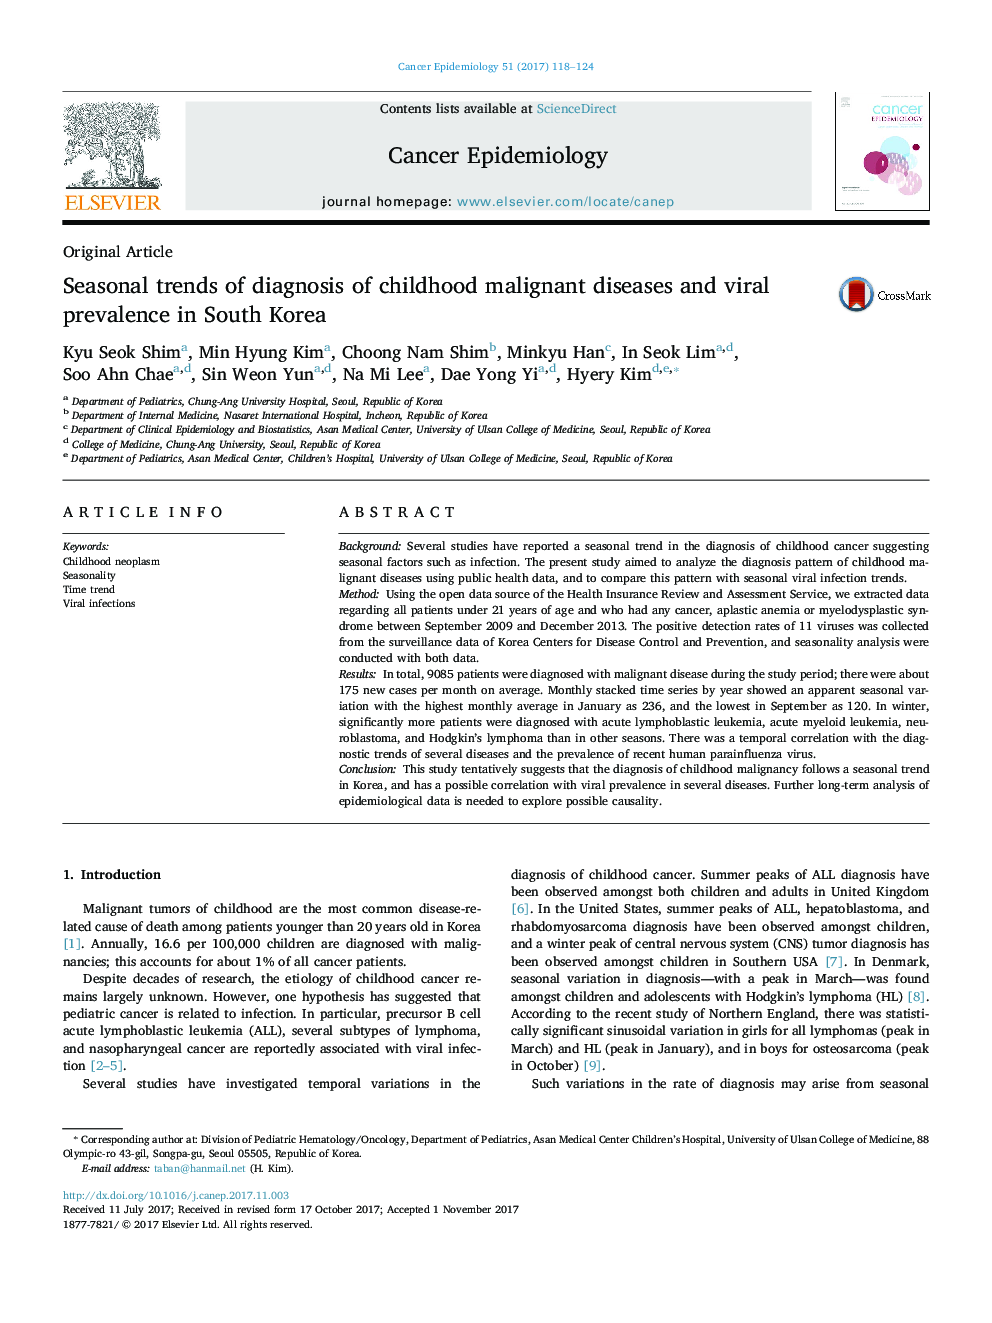 Seasonal trends of diagnosis of childhood malignant diseases and viral prevalence in South Korea